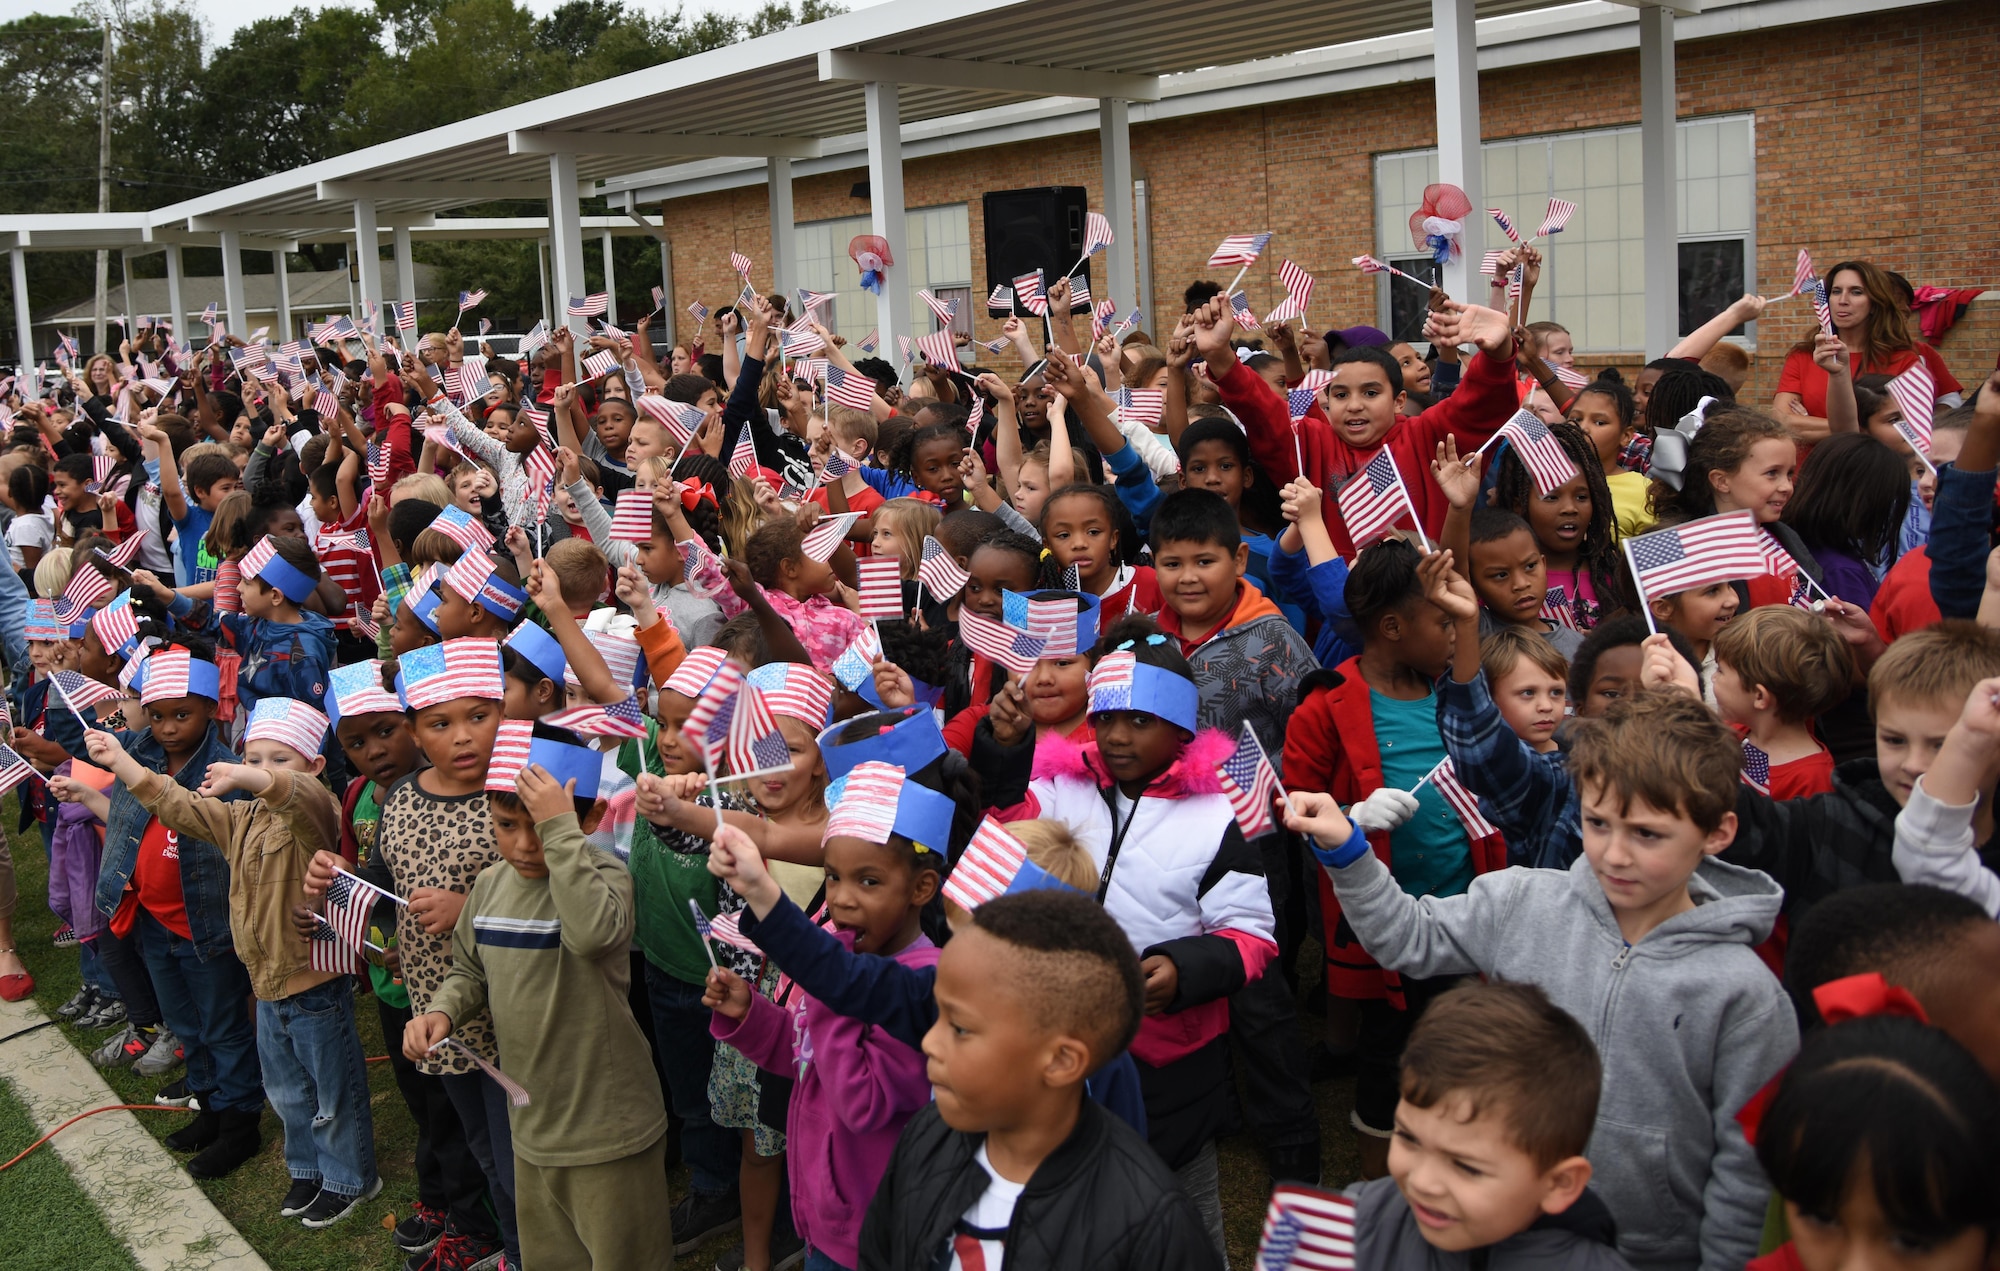 Students at Jeff Davis Elementary School wave their flags during a Veterans Day celebration Nov. 11, 2016, in Biloxi, Miss. During the event, students delivered the Pledge of Allegiance and sang several patriotic songs. Keesler Air Force Base leadership, Honor Guard Airmen and personnel attended the event. (U.S. Air Force photo by Kemberly Groue/Released)